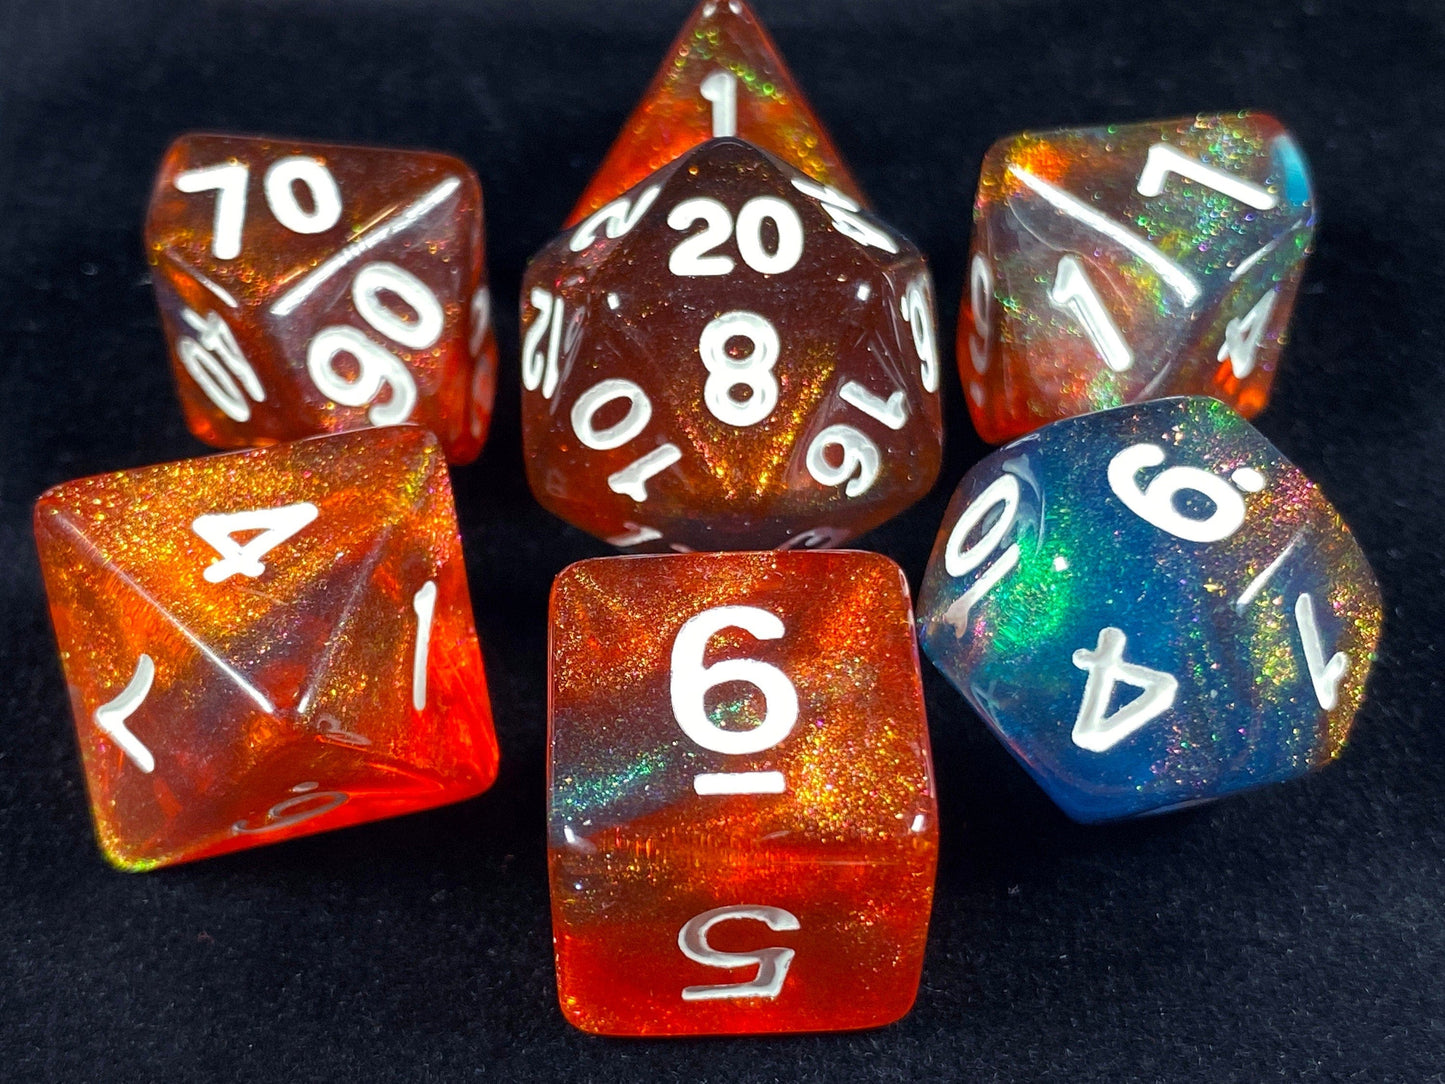 The Crooked Tavern Dice Sets Ice and Fire RPG Dice Set | Blue and Red Iridescent Sparkle Dice!